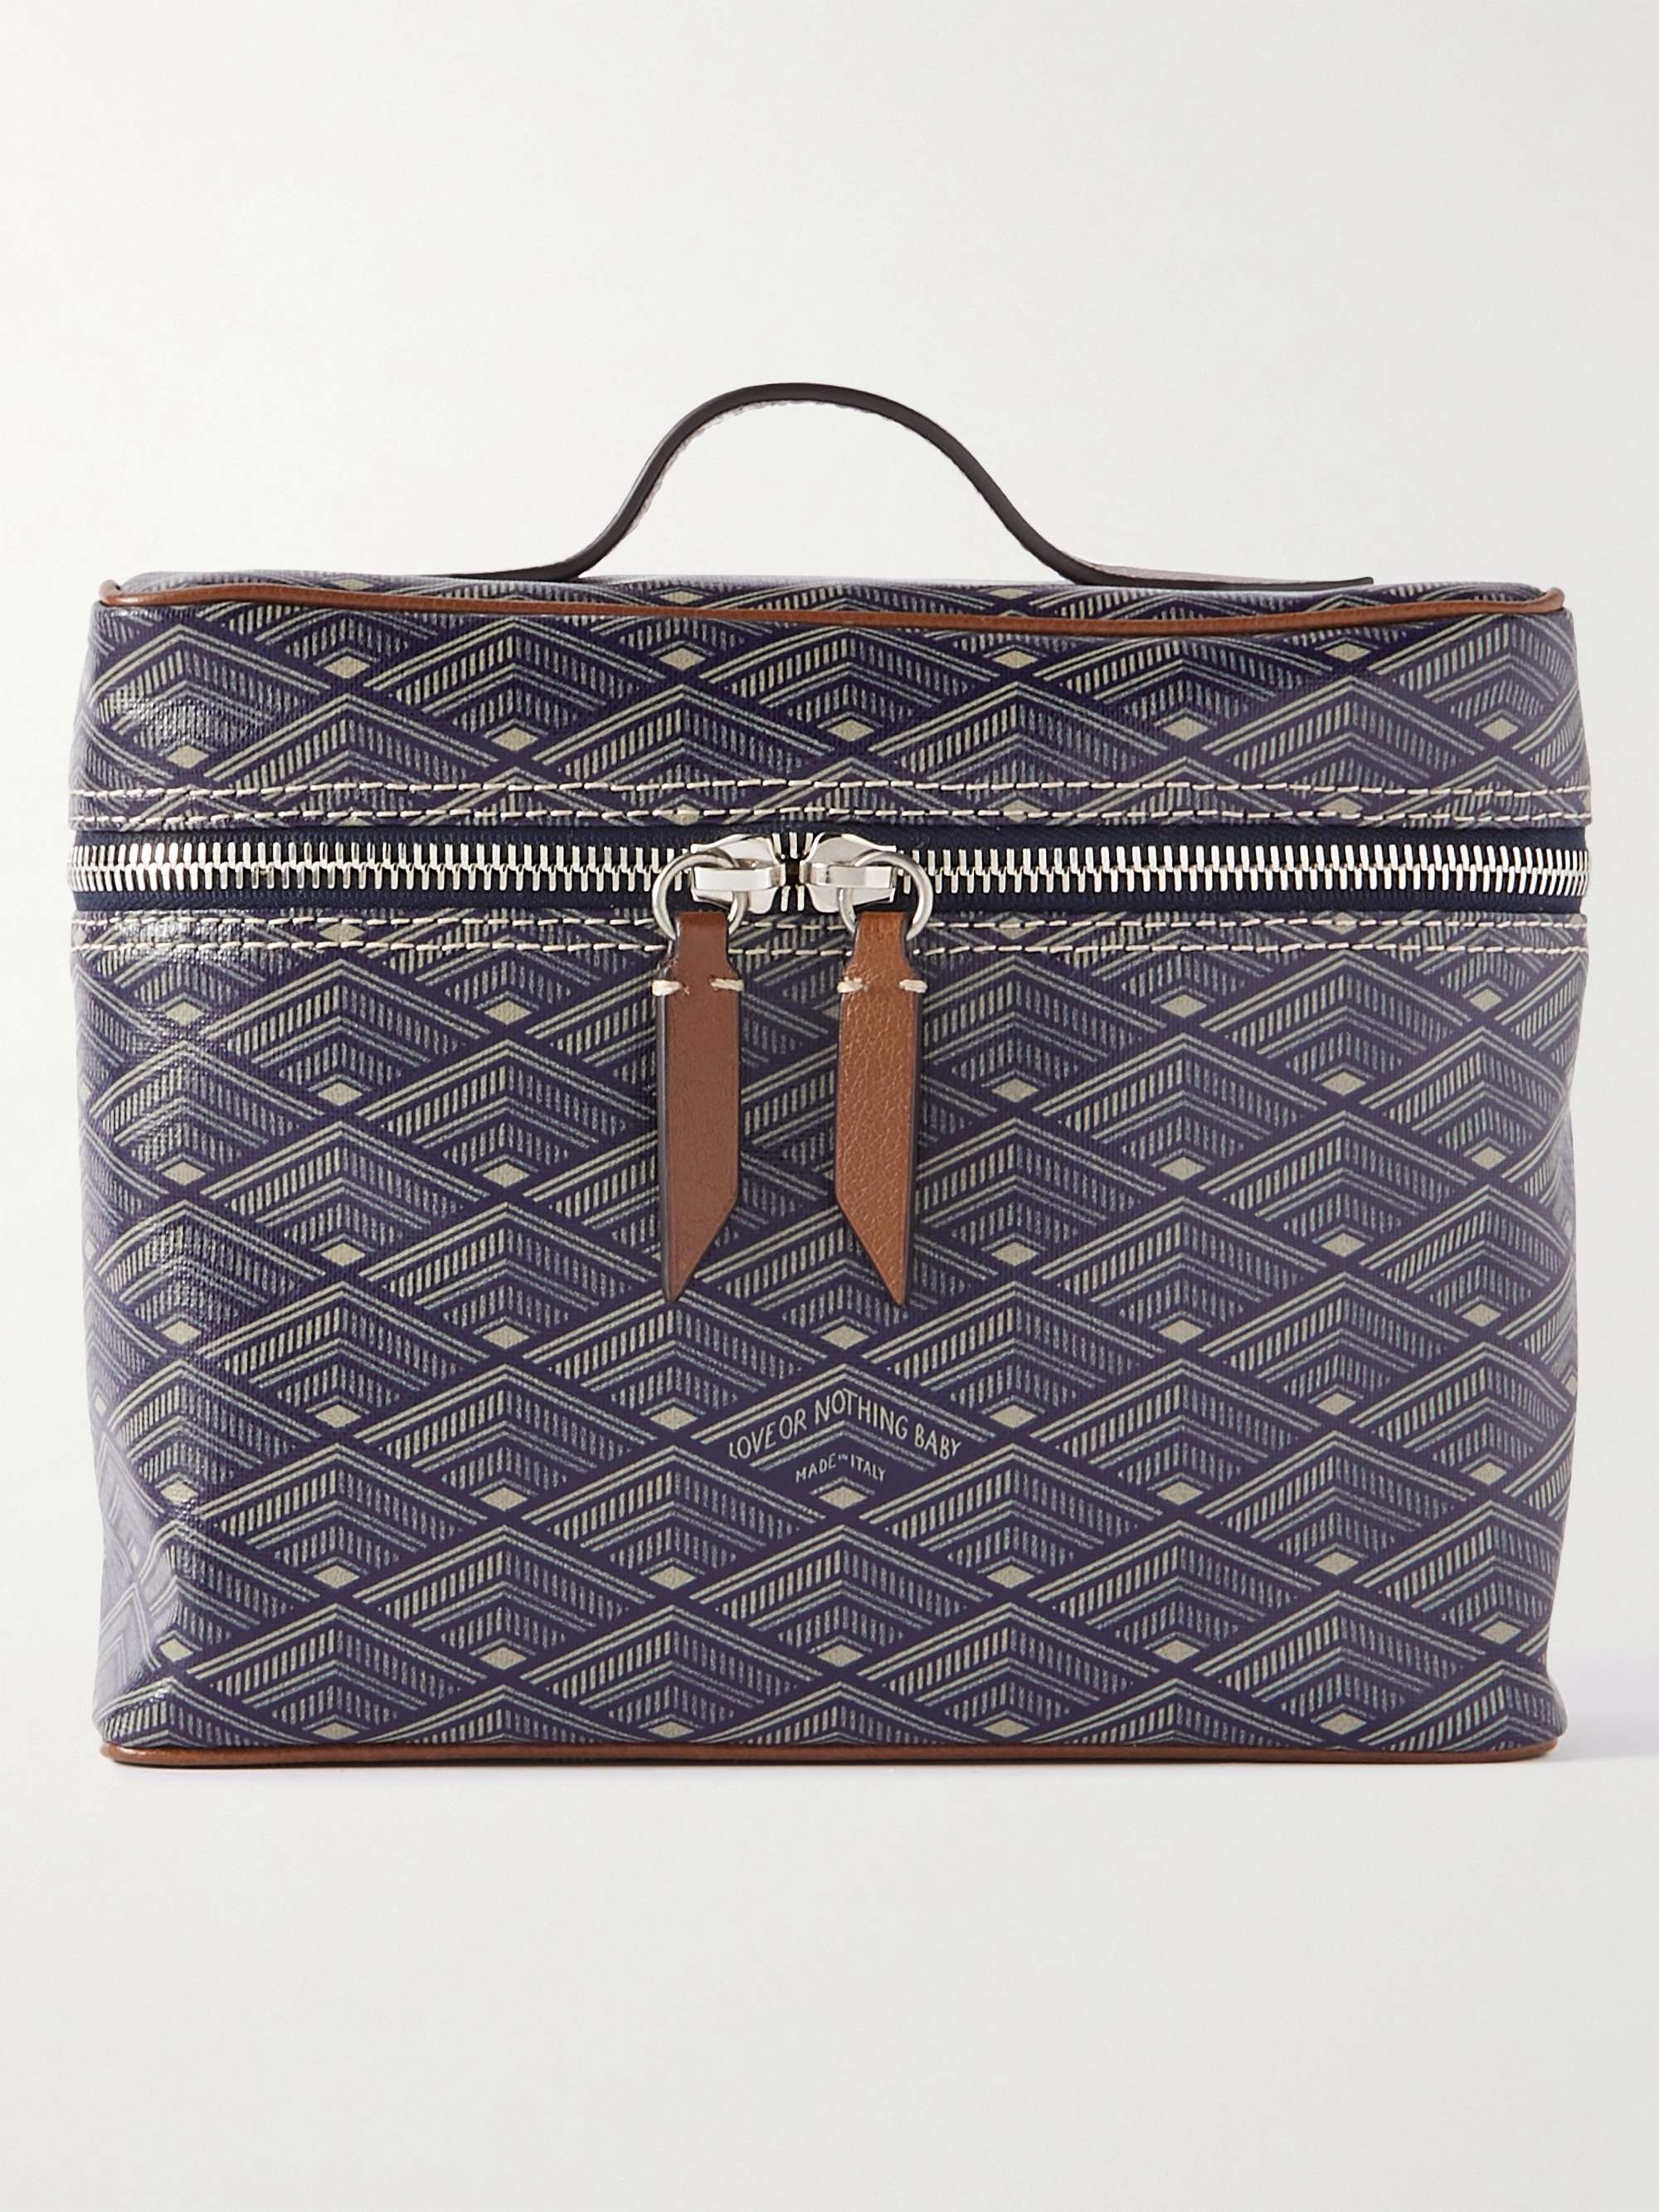 MÉTIER Many Days Leather-Trimmed Printed Canvas Wash Bag